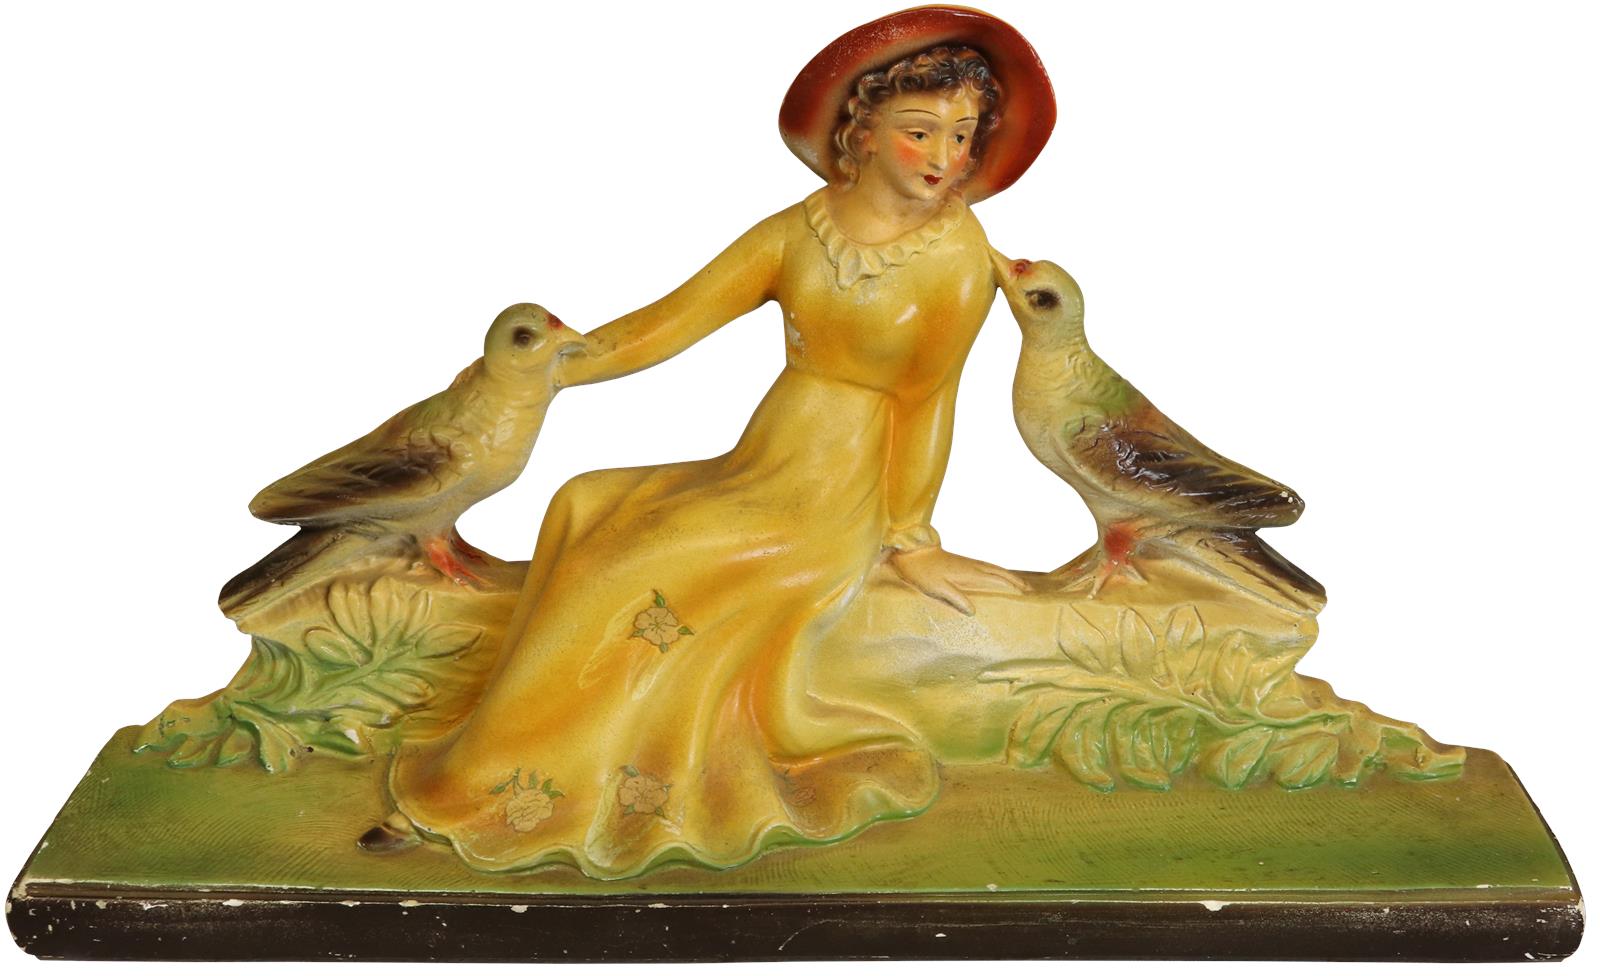 Colorful Antique Art Deco Chalkware Sculpture of Lady with Birds and Pair of Vases-Image 2